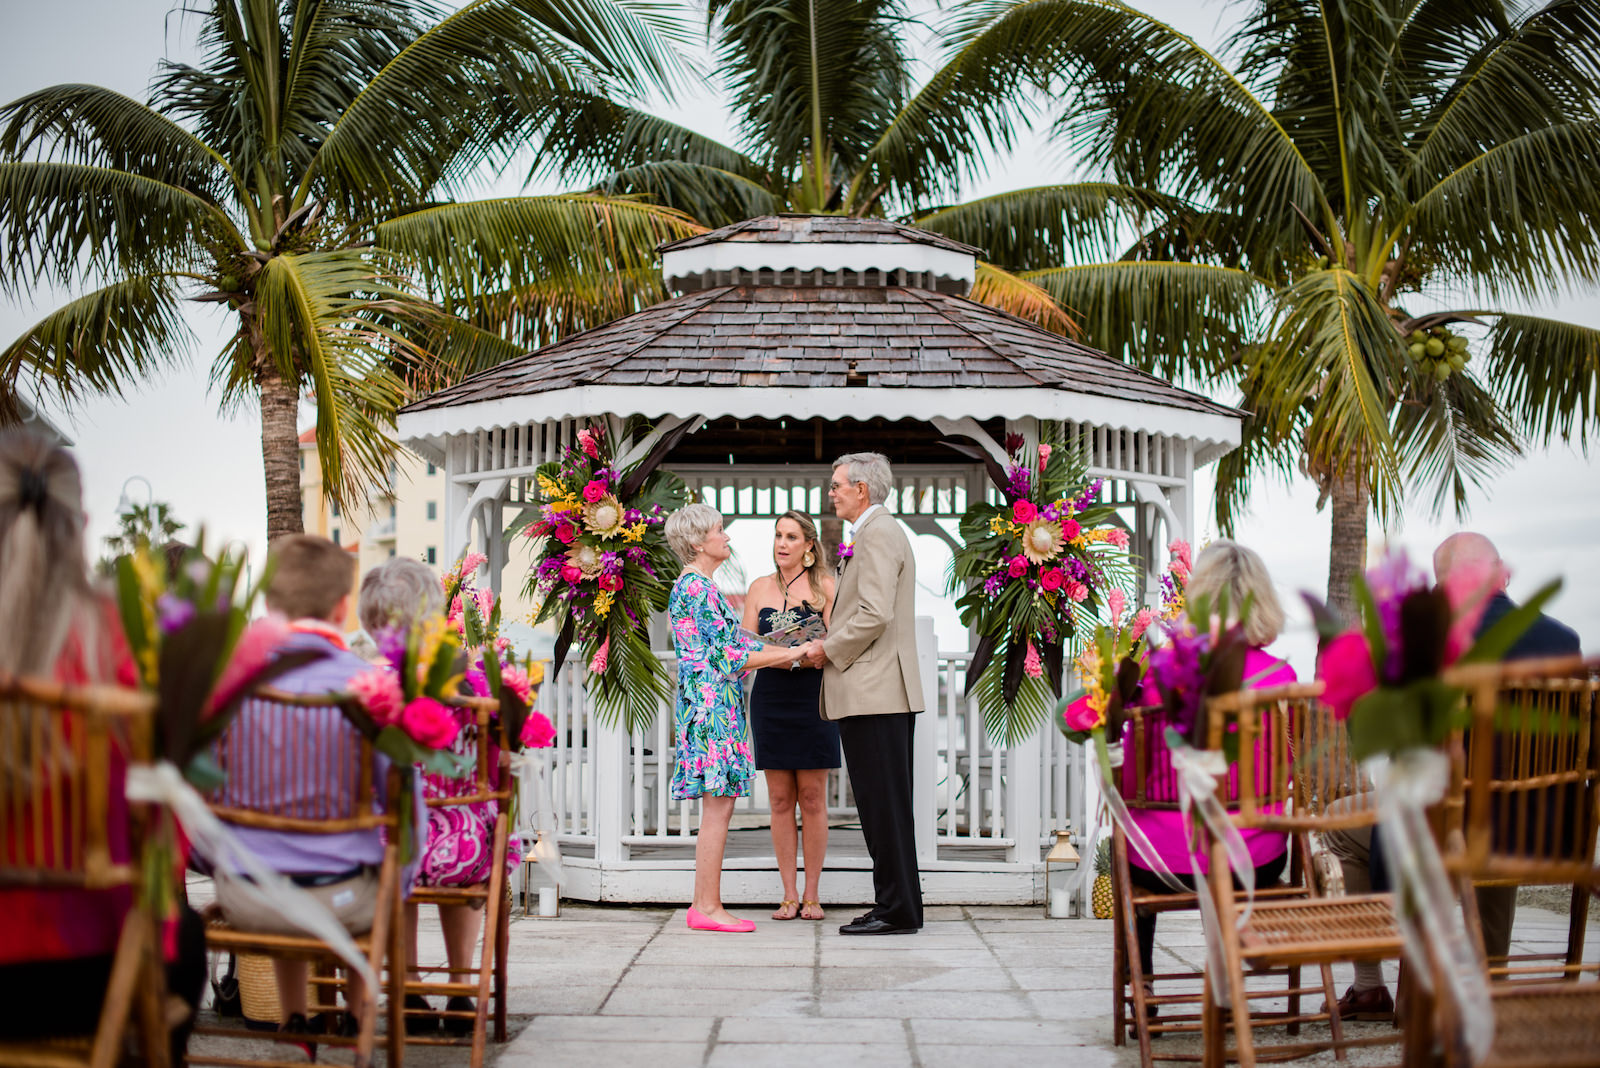 Florida Husband and Wife Hold Hands at Tropical Wedding Vow Renewal Ceremony with Decor, Bamboo Folding Chairs, Lilly Pulitzer Themed Floral Arrangements, Gazebo Alter with Bright Pink Exotic Flowers, Purple Stems, Blush King Proteas, with Green Palms and Monstera Leafs | Tampa Bay Vow Renewal and Micro wedding Planner Perfecting The Plan | St. Petersburg Private Beachfront Venue Isla Del Sol | St. Pete Beach DJ Grant Hemond & Associates